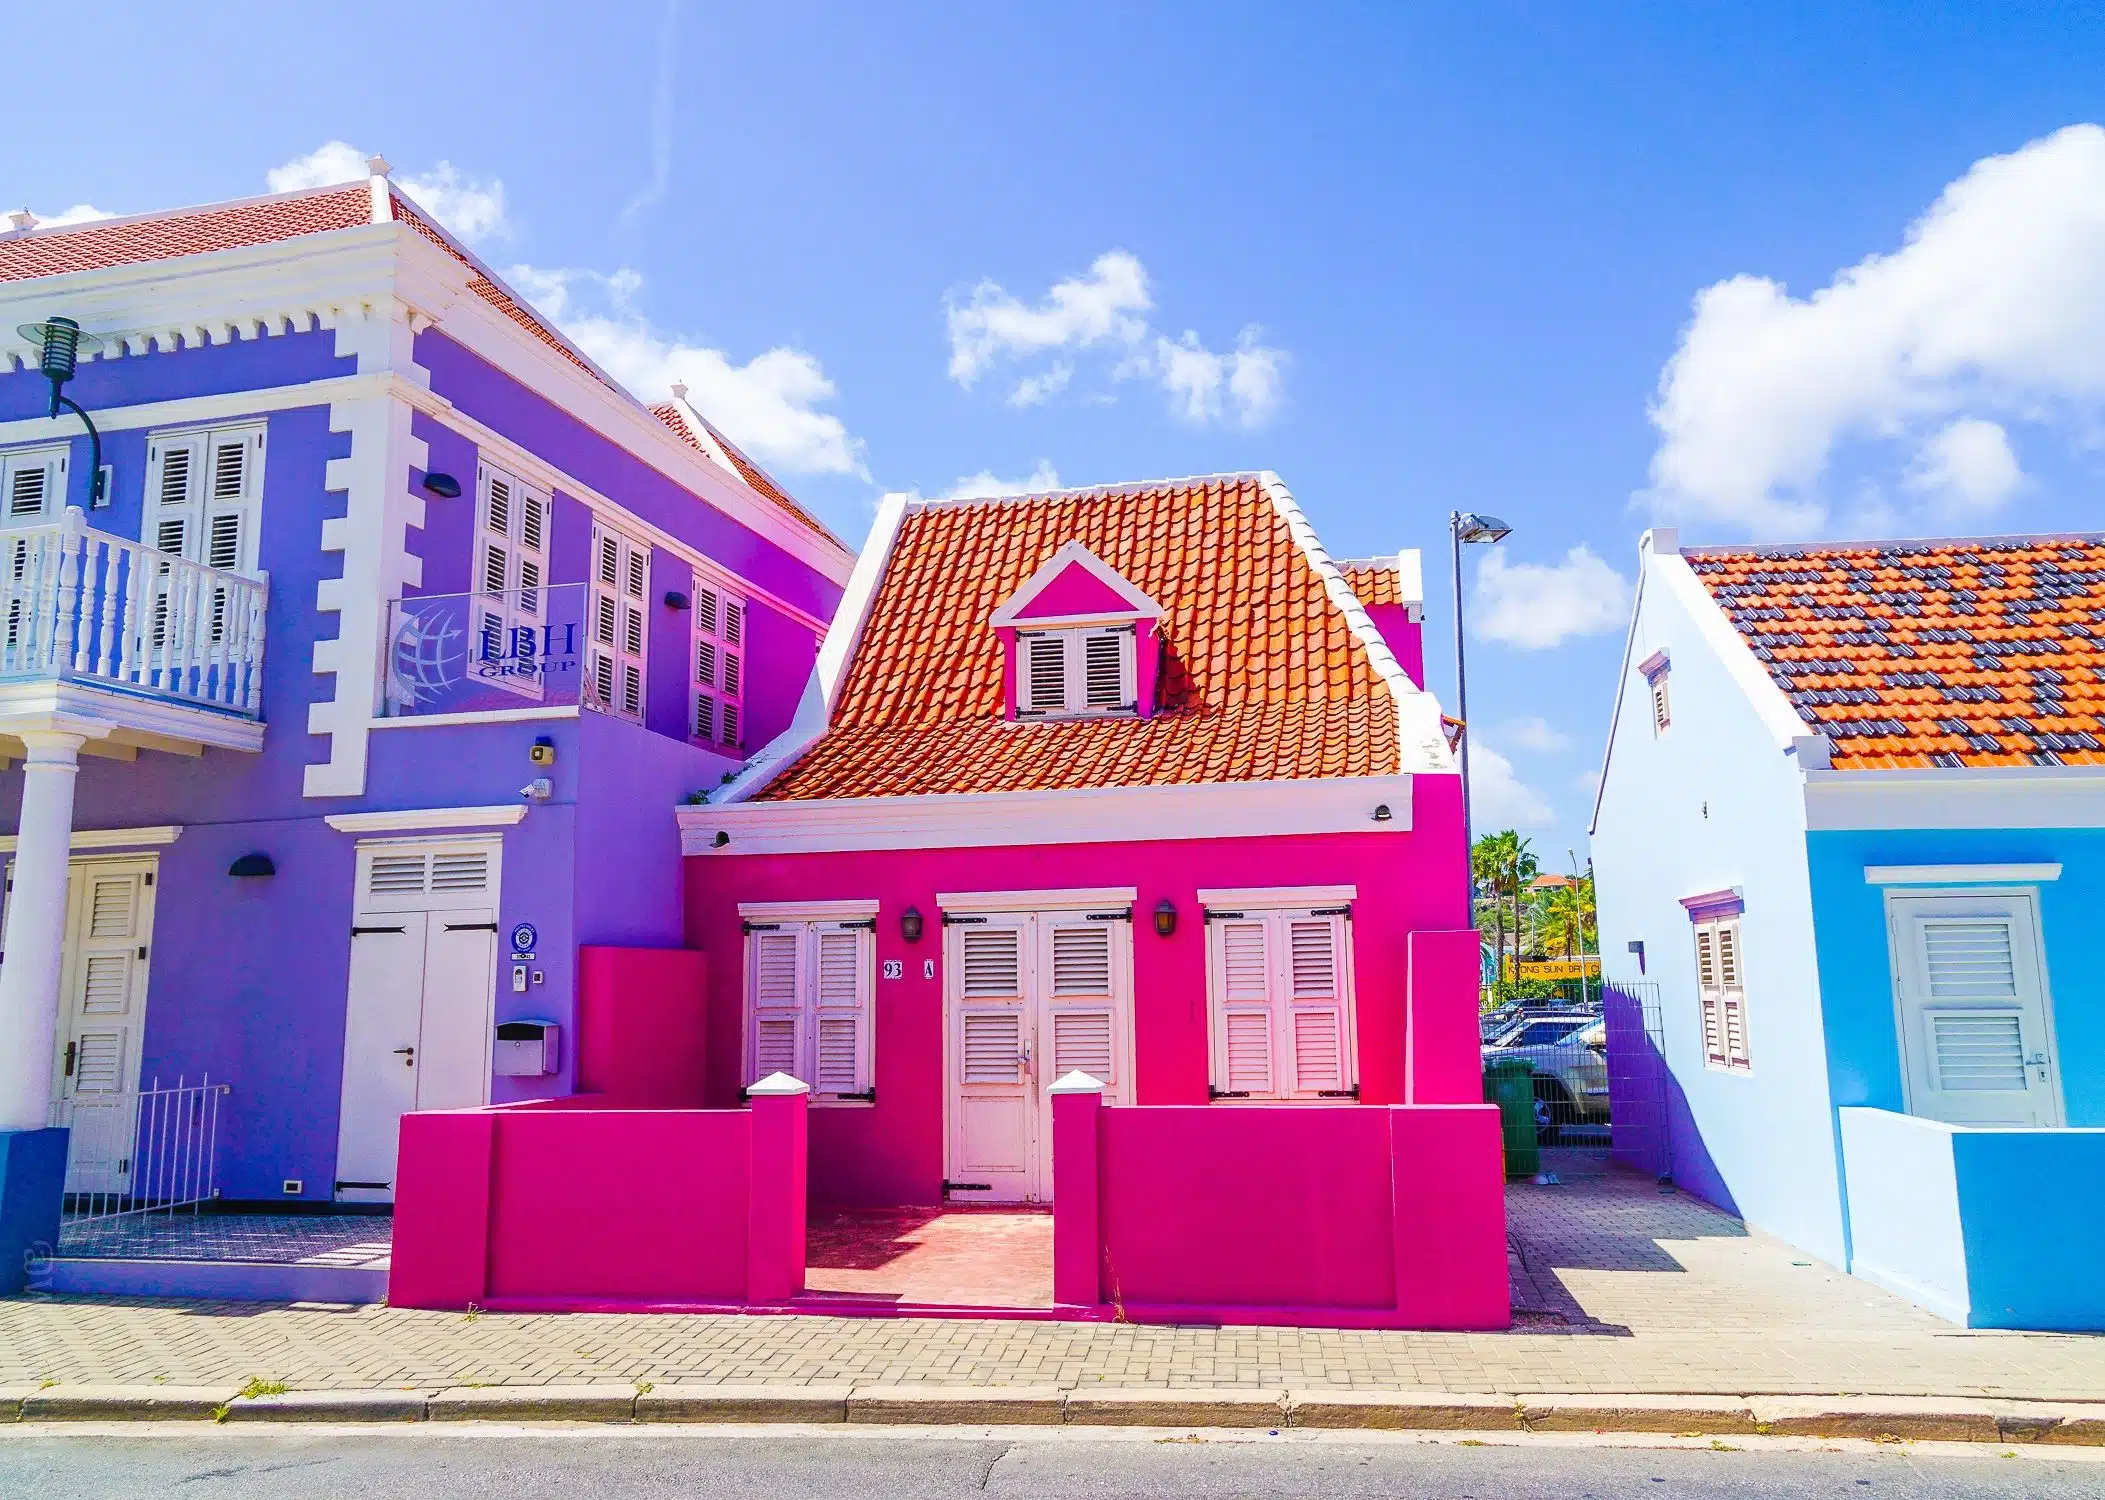 The paint colors of Willemstad are out of a dream.